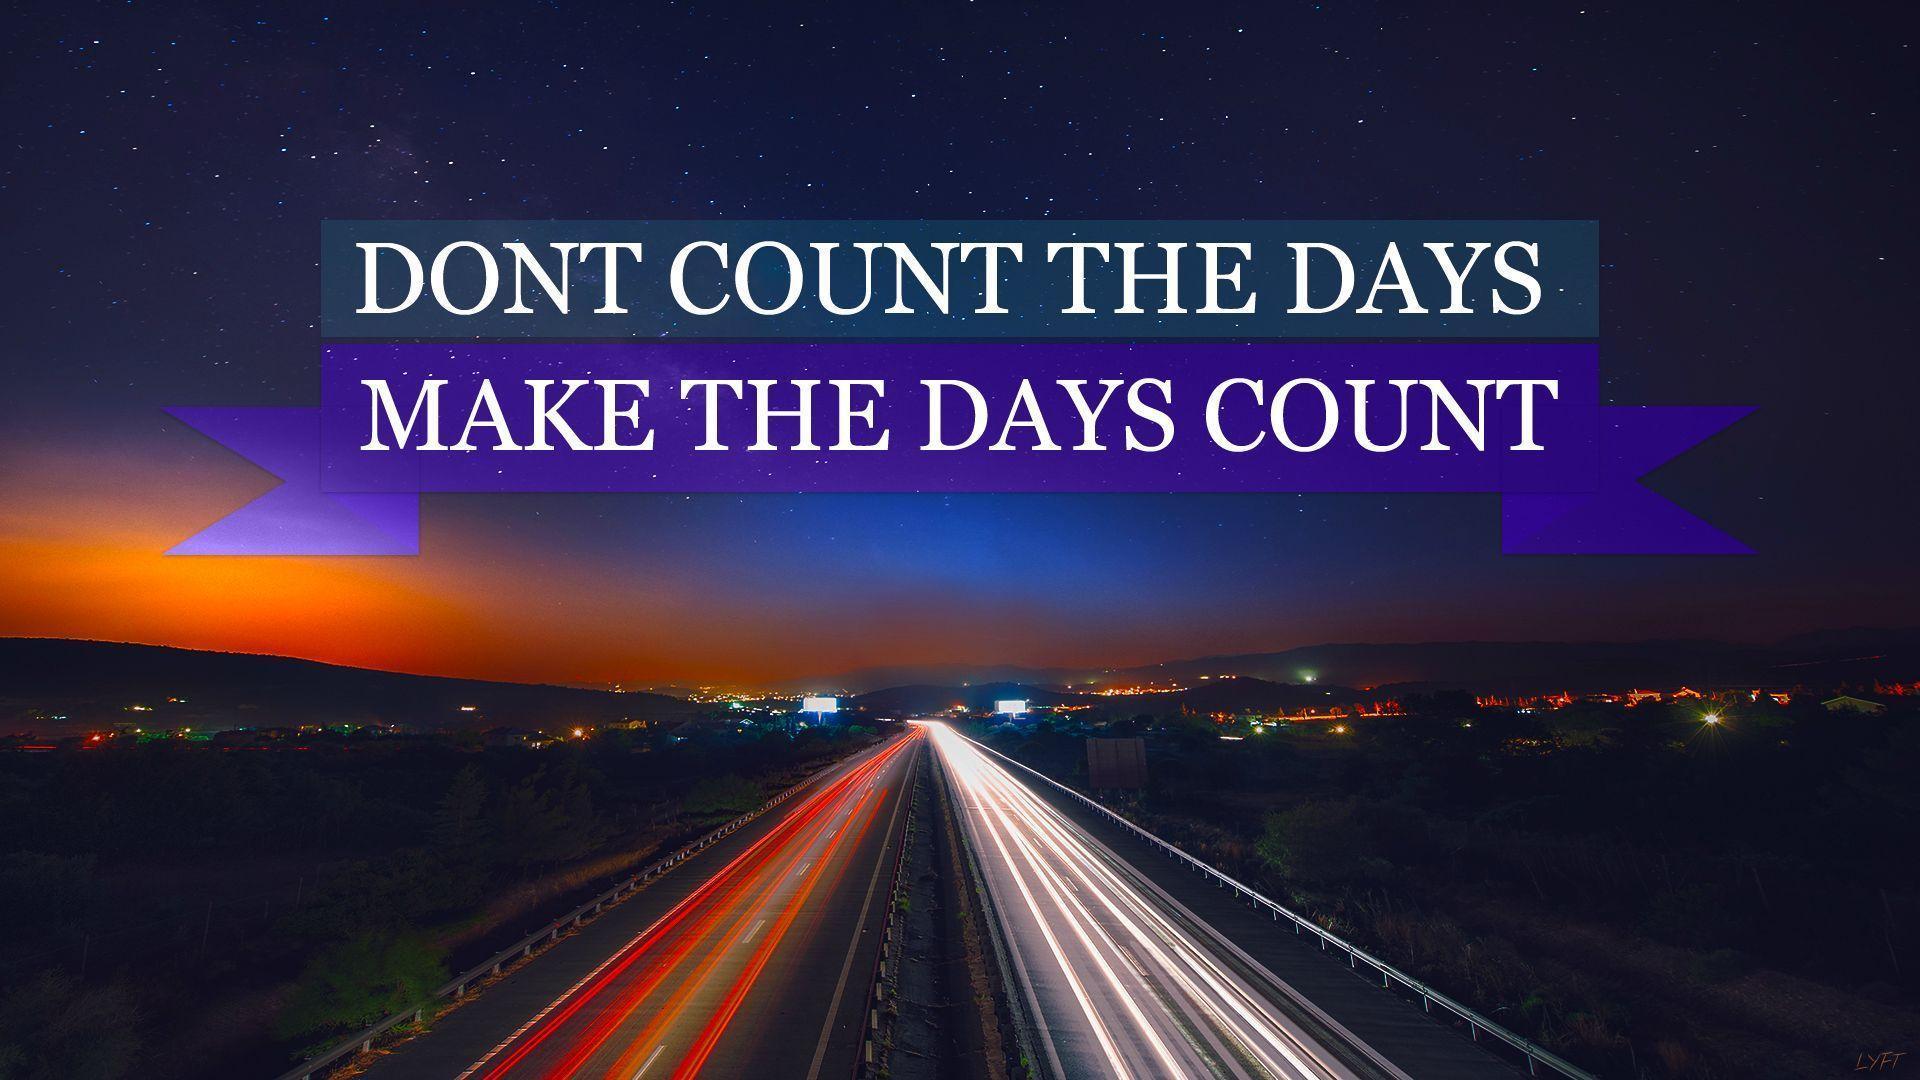 Make it count [1920x1080]